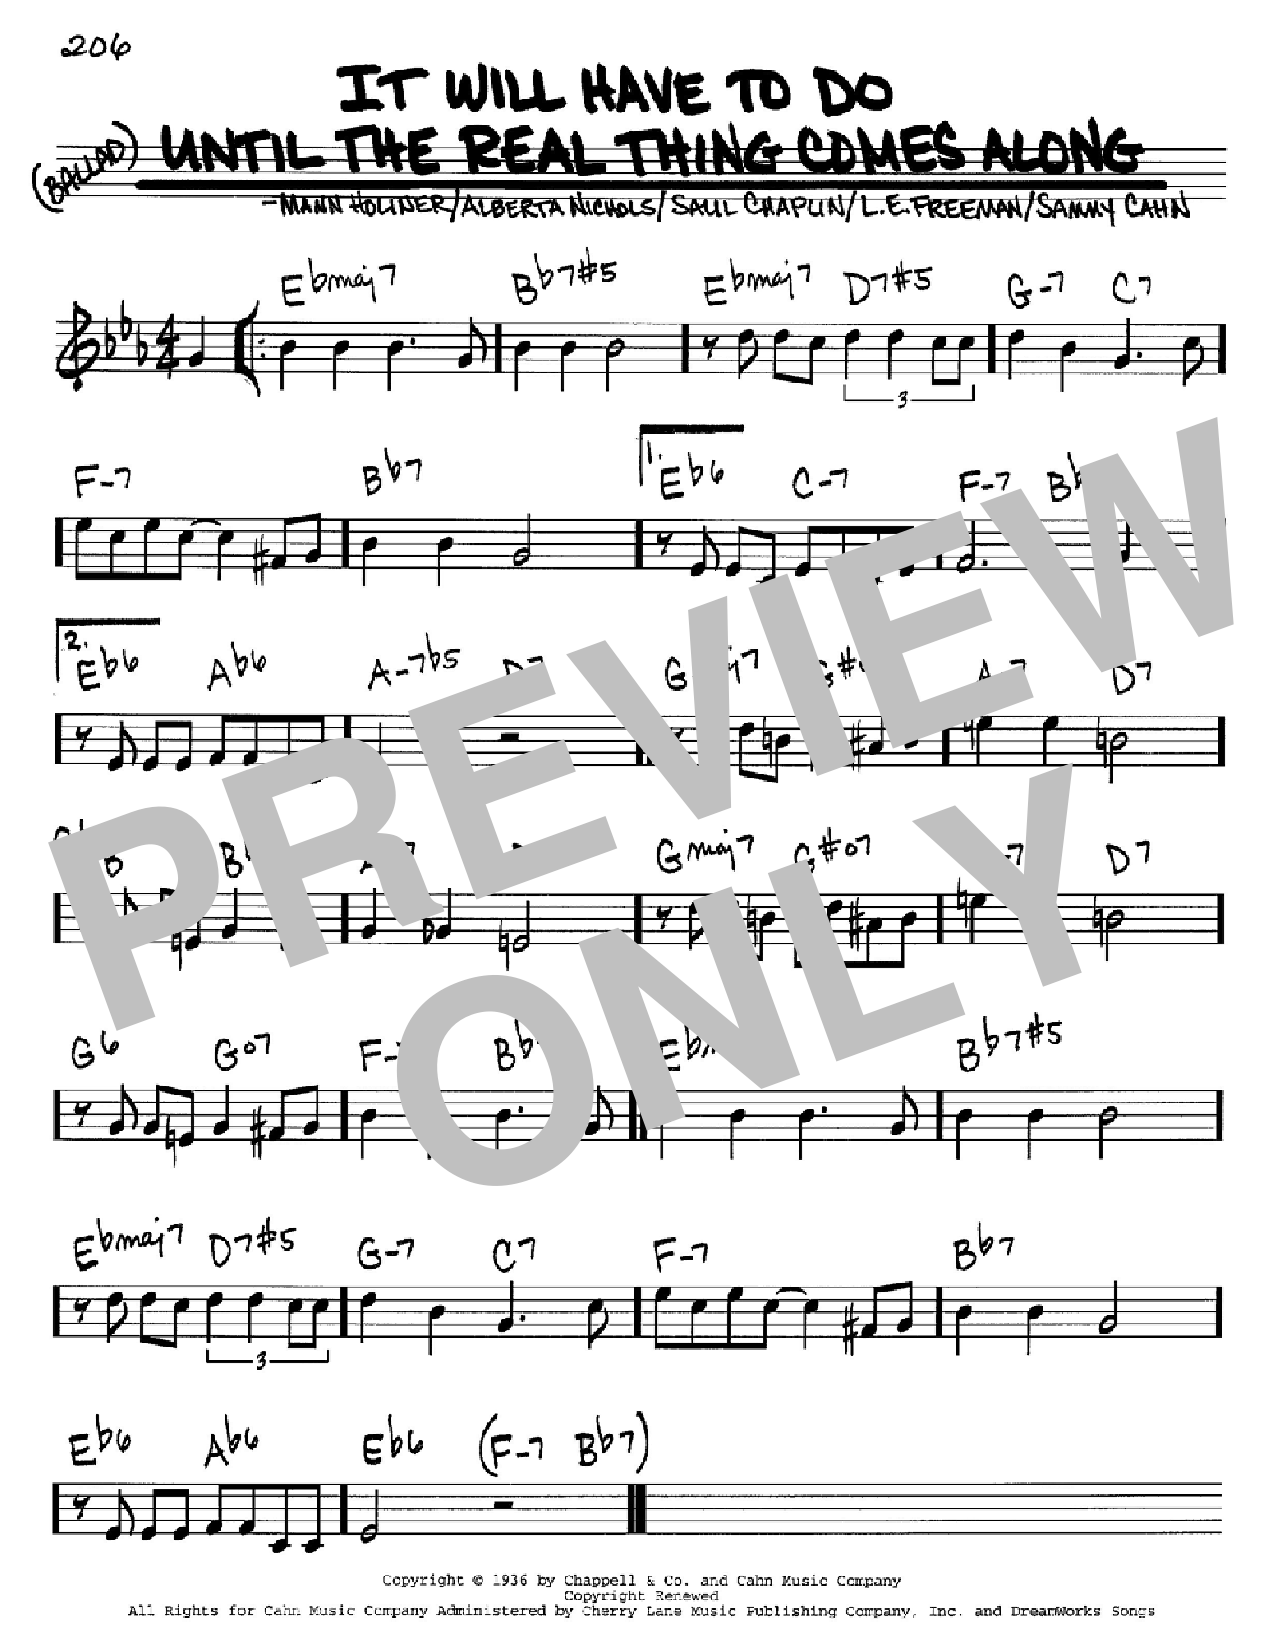 Download Sammy Cahn It Will Have To Do Until The Real Thing Sheet Music